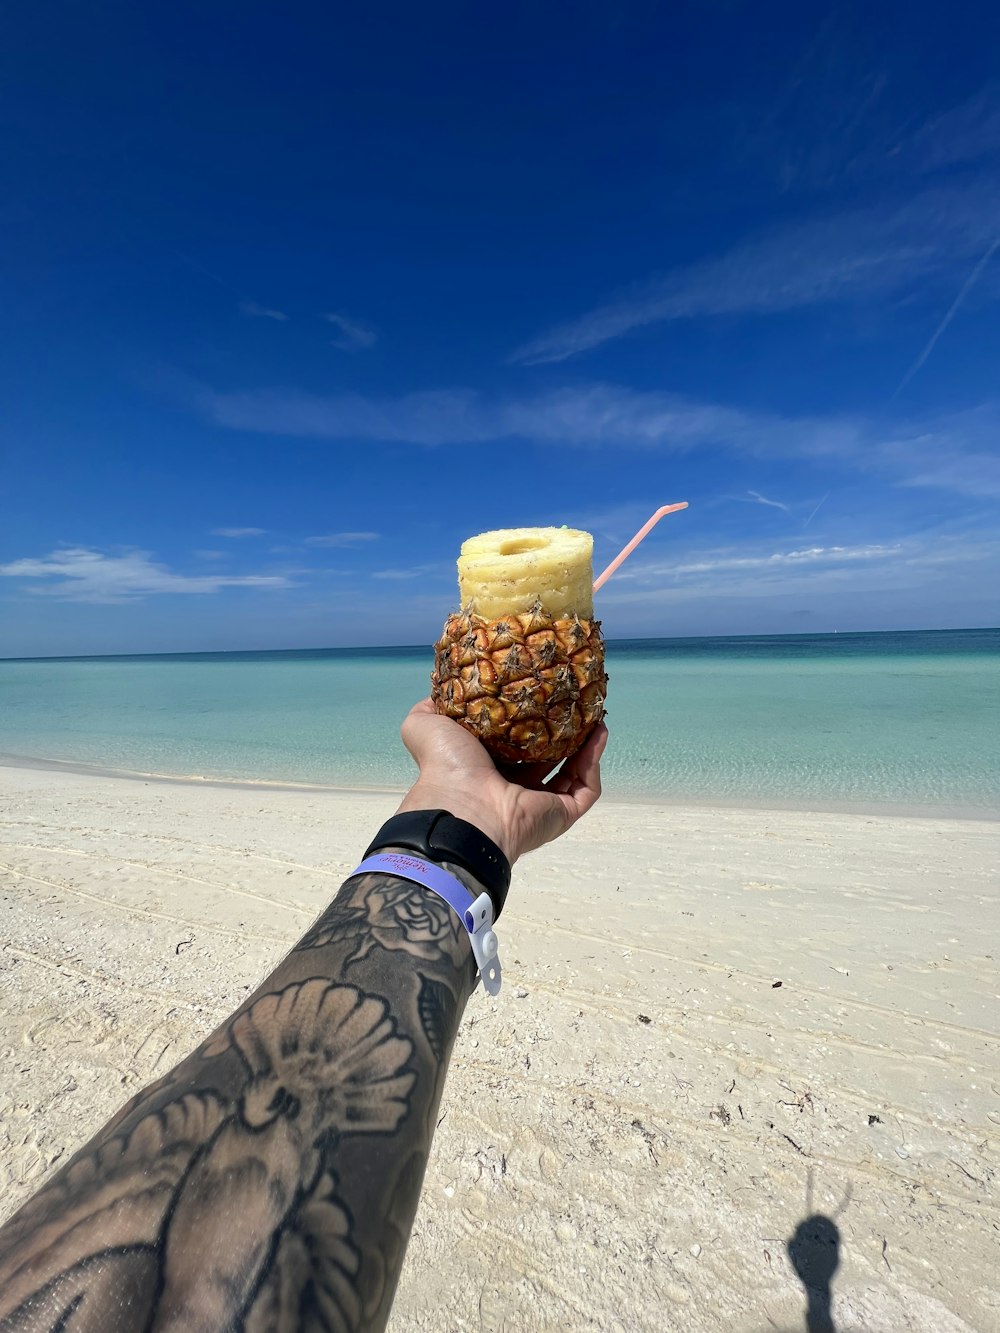 a person holding up a pineapple on a beach